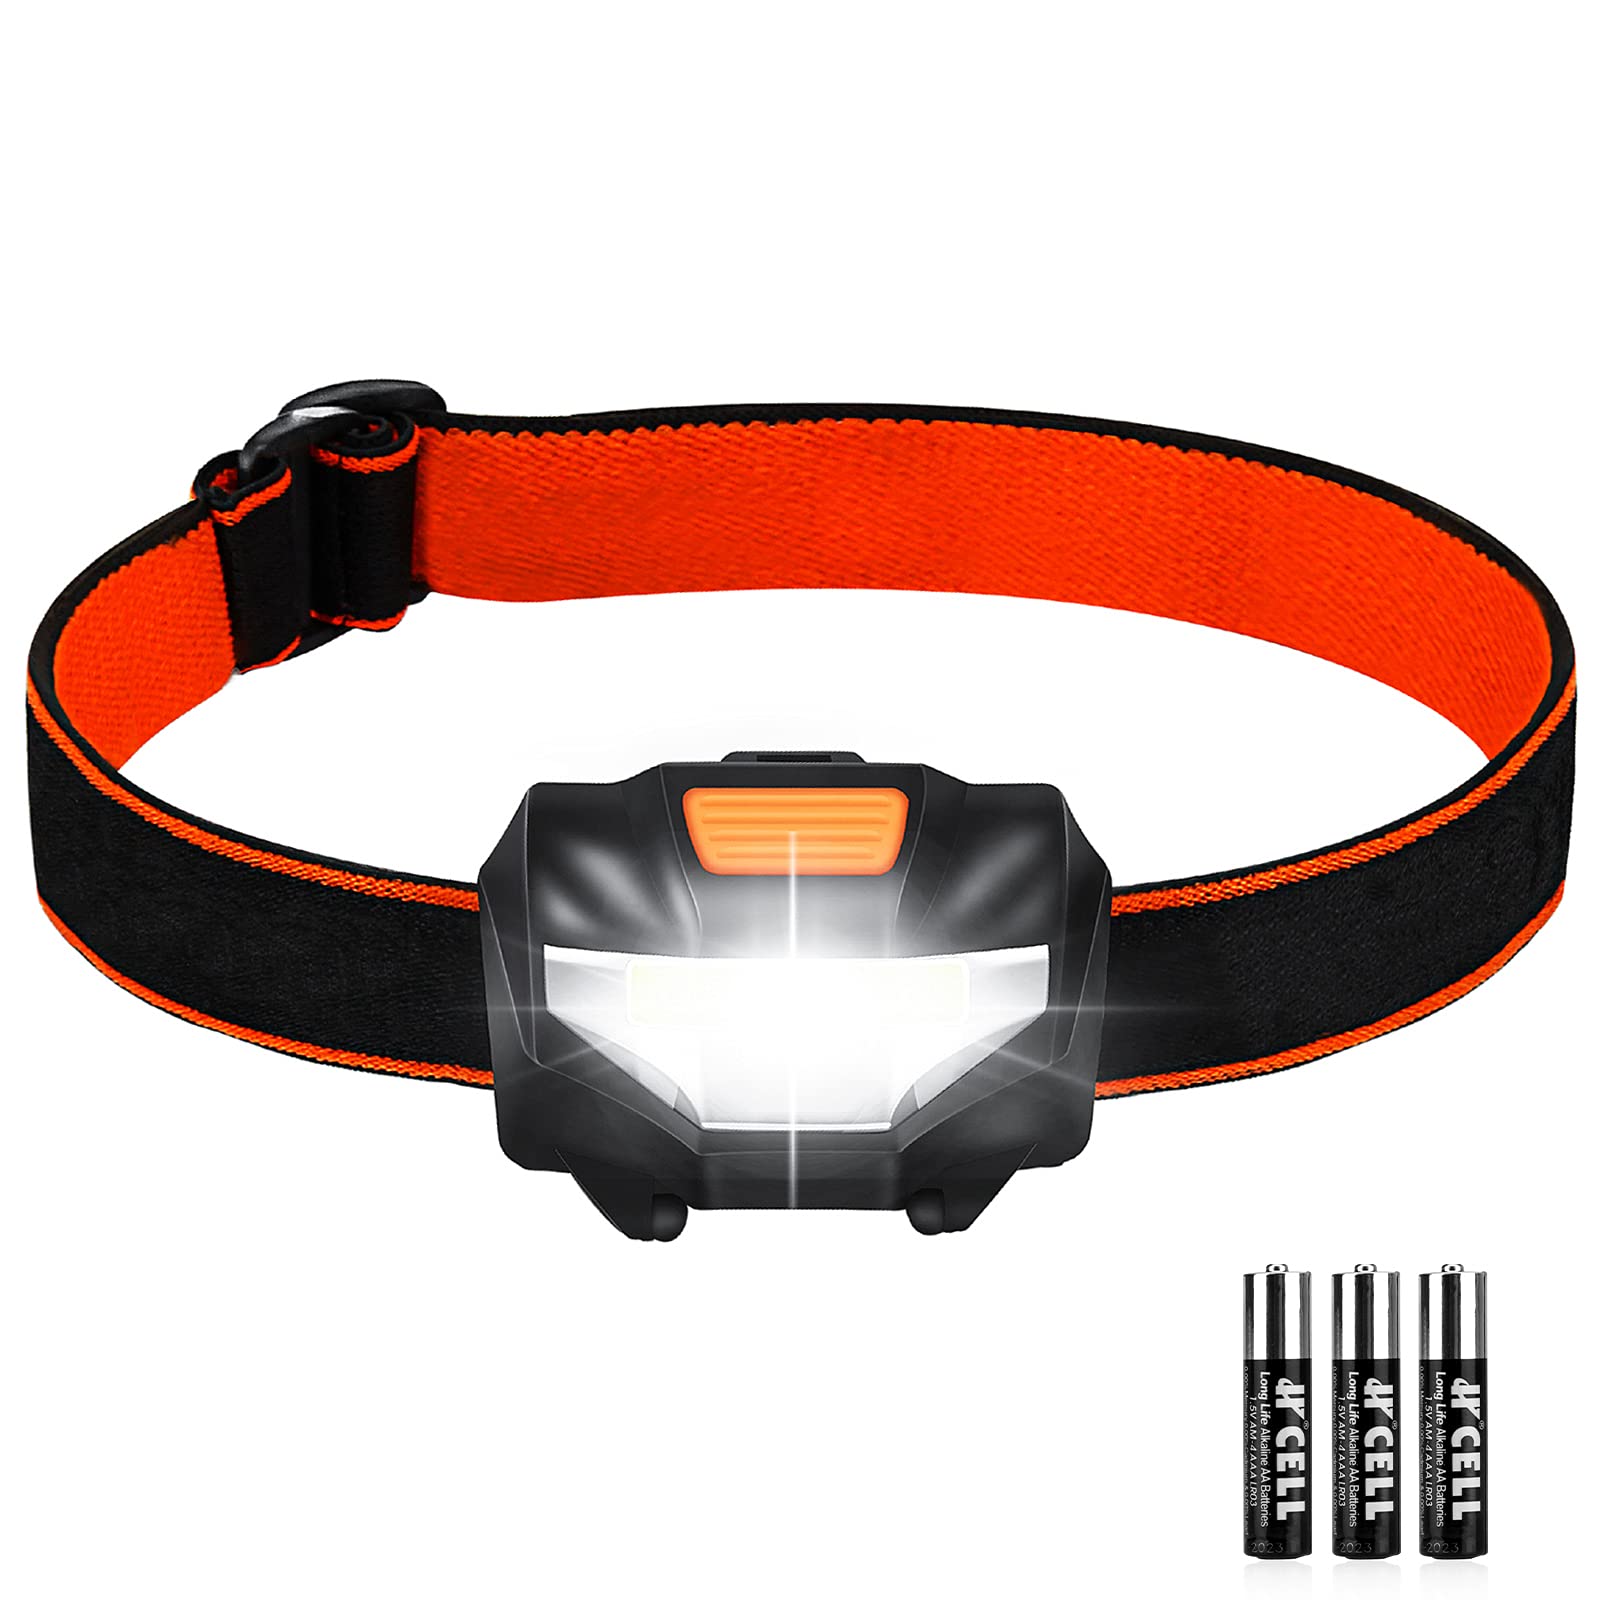 LED Head Torch, Super Bright Lightweight LED Headlamp with 3 Lighting Modes, Battery Powered Waterproof LED Headlight for Camping, Running, Cycling, Fishing, Hiking, Reading, Outoor Sports